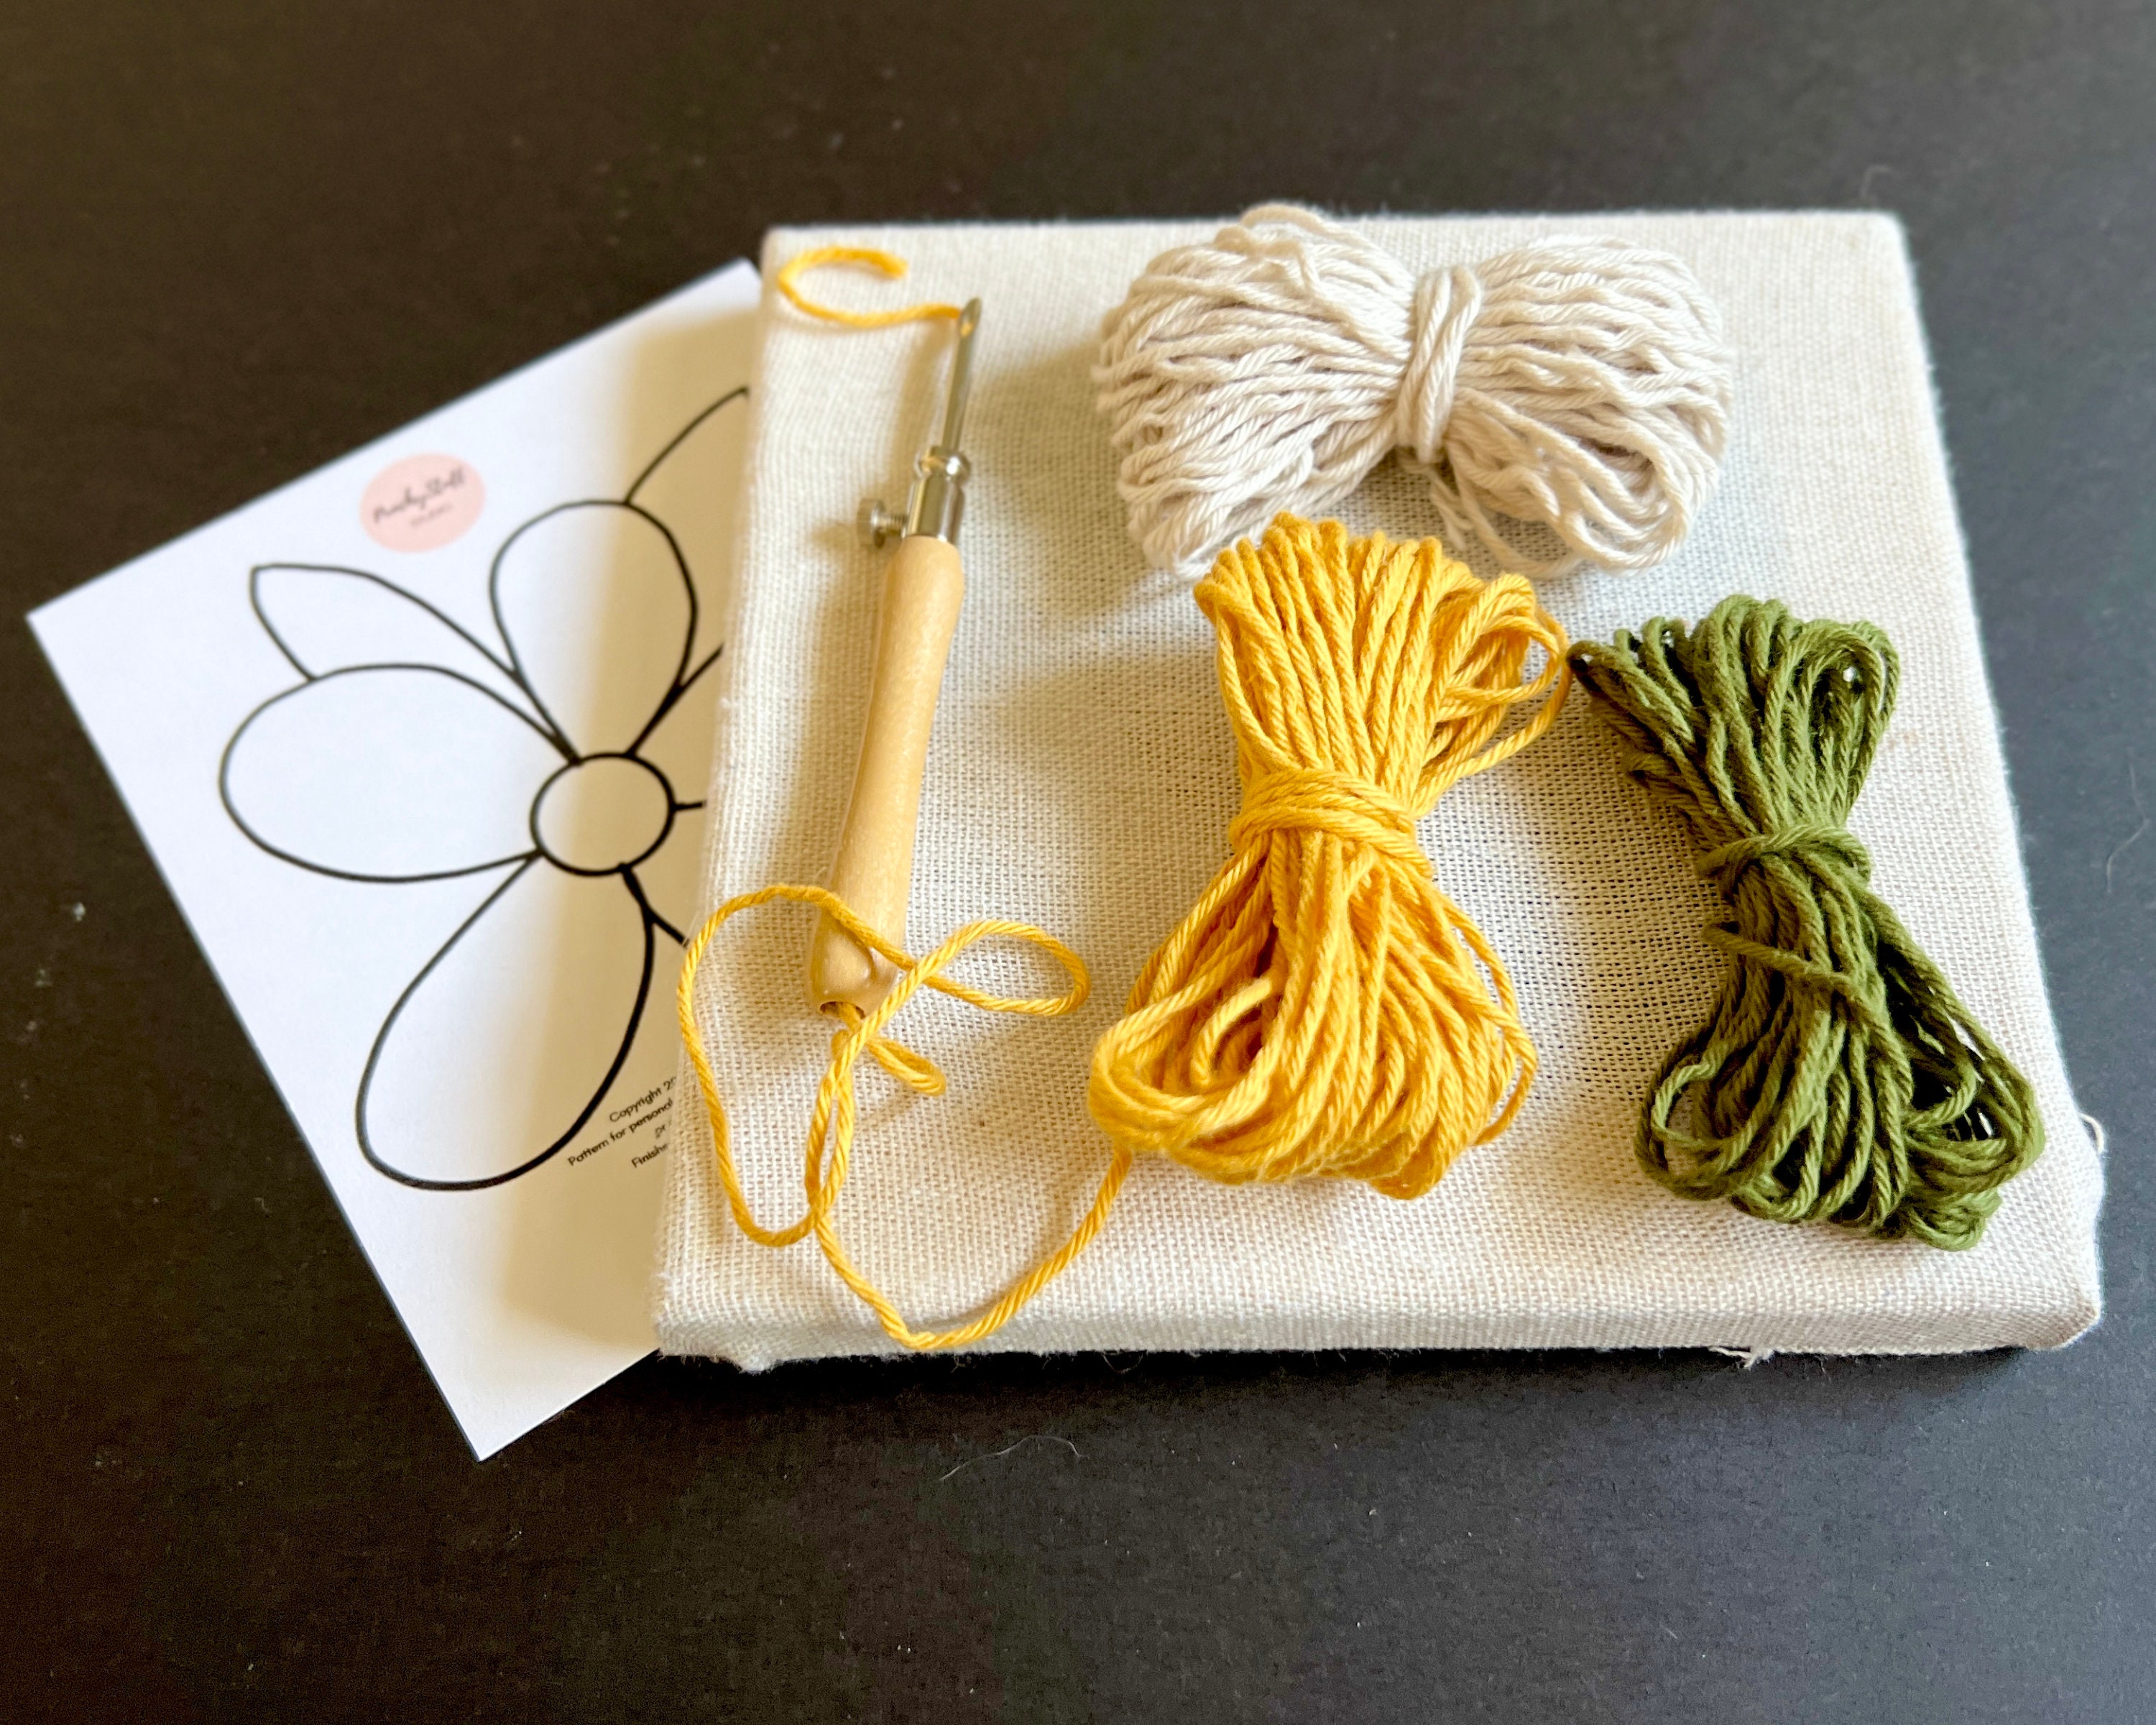 CraftyStitch Punch Needle Embroidery Kit: Beginner Friendly, Complete DIY  Set For Home Decor & Decompression From Zhuziqin, $16.92